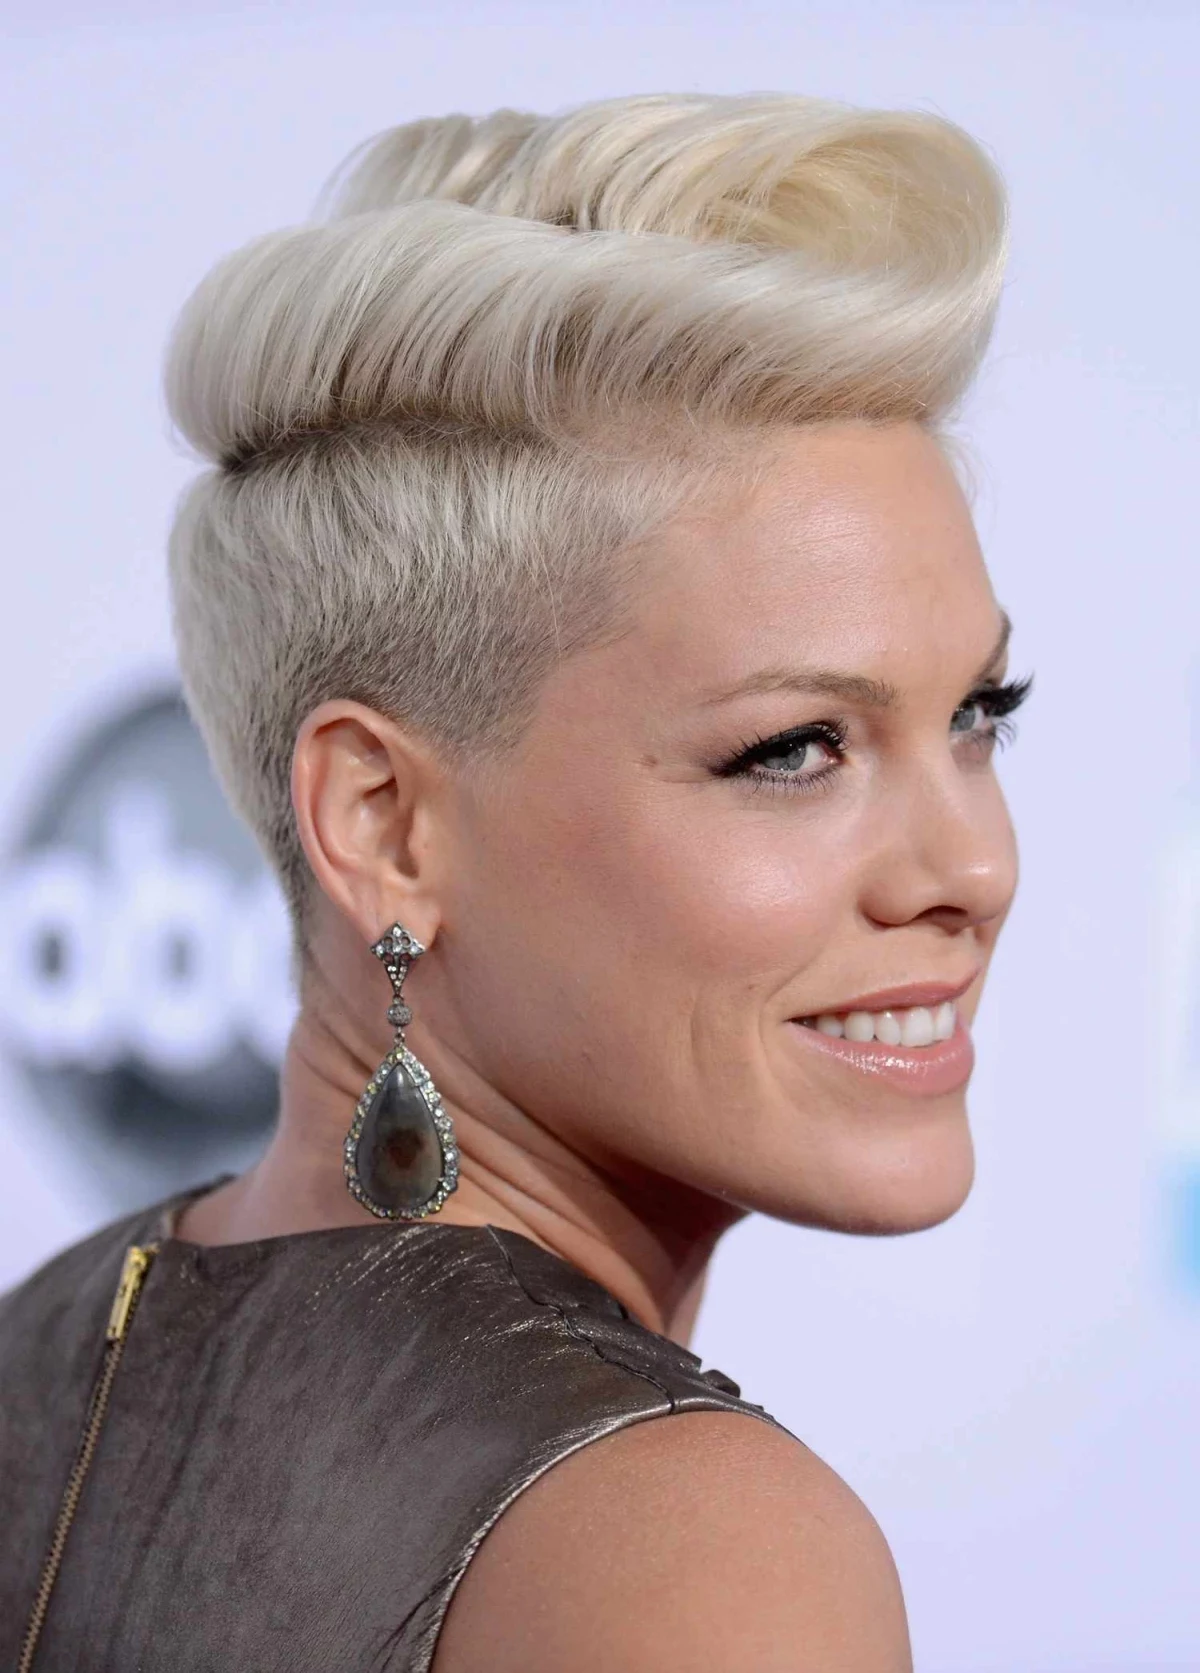 pompadour hairstyles for women pink with white pompadour